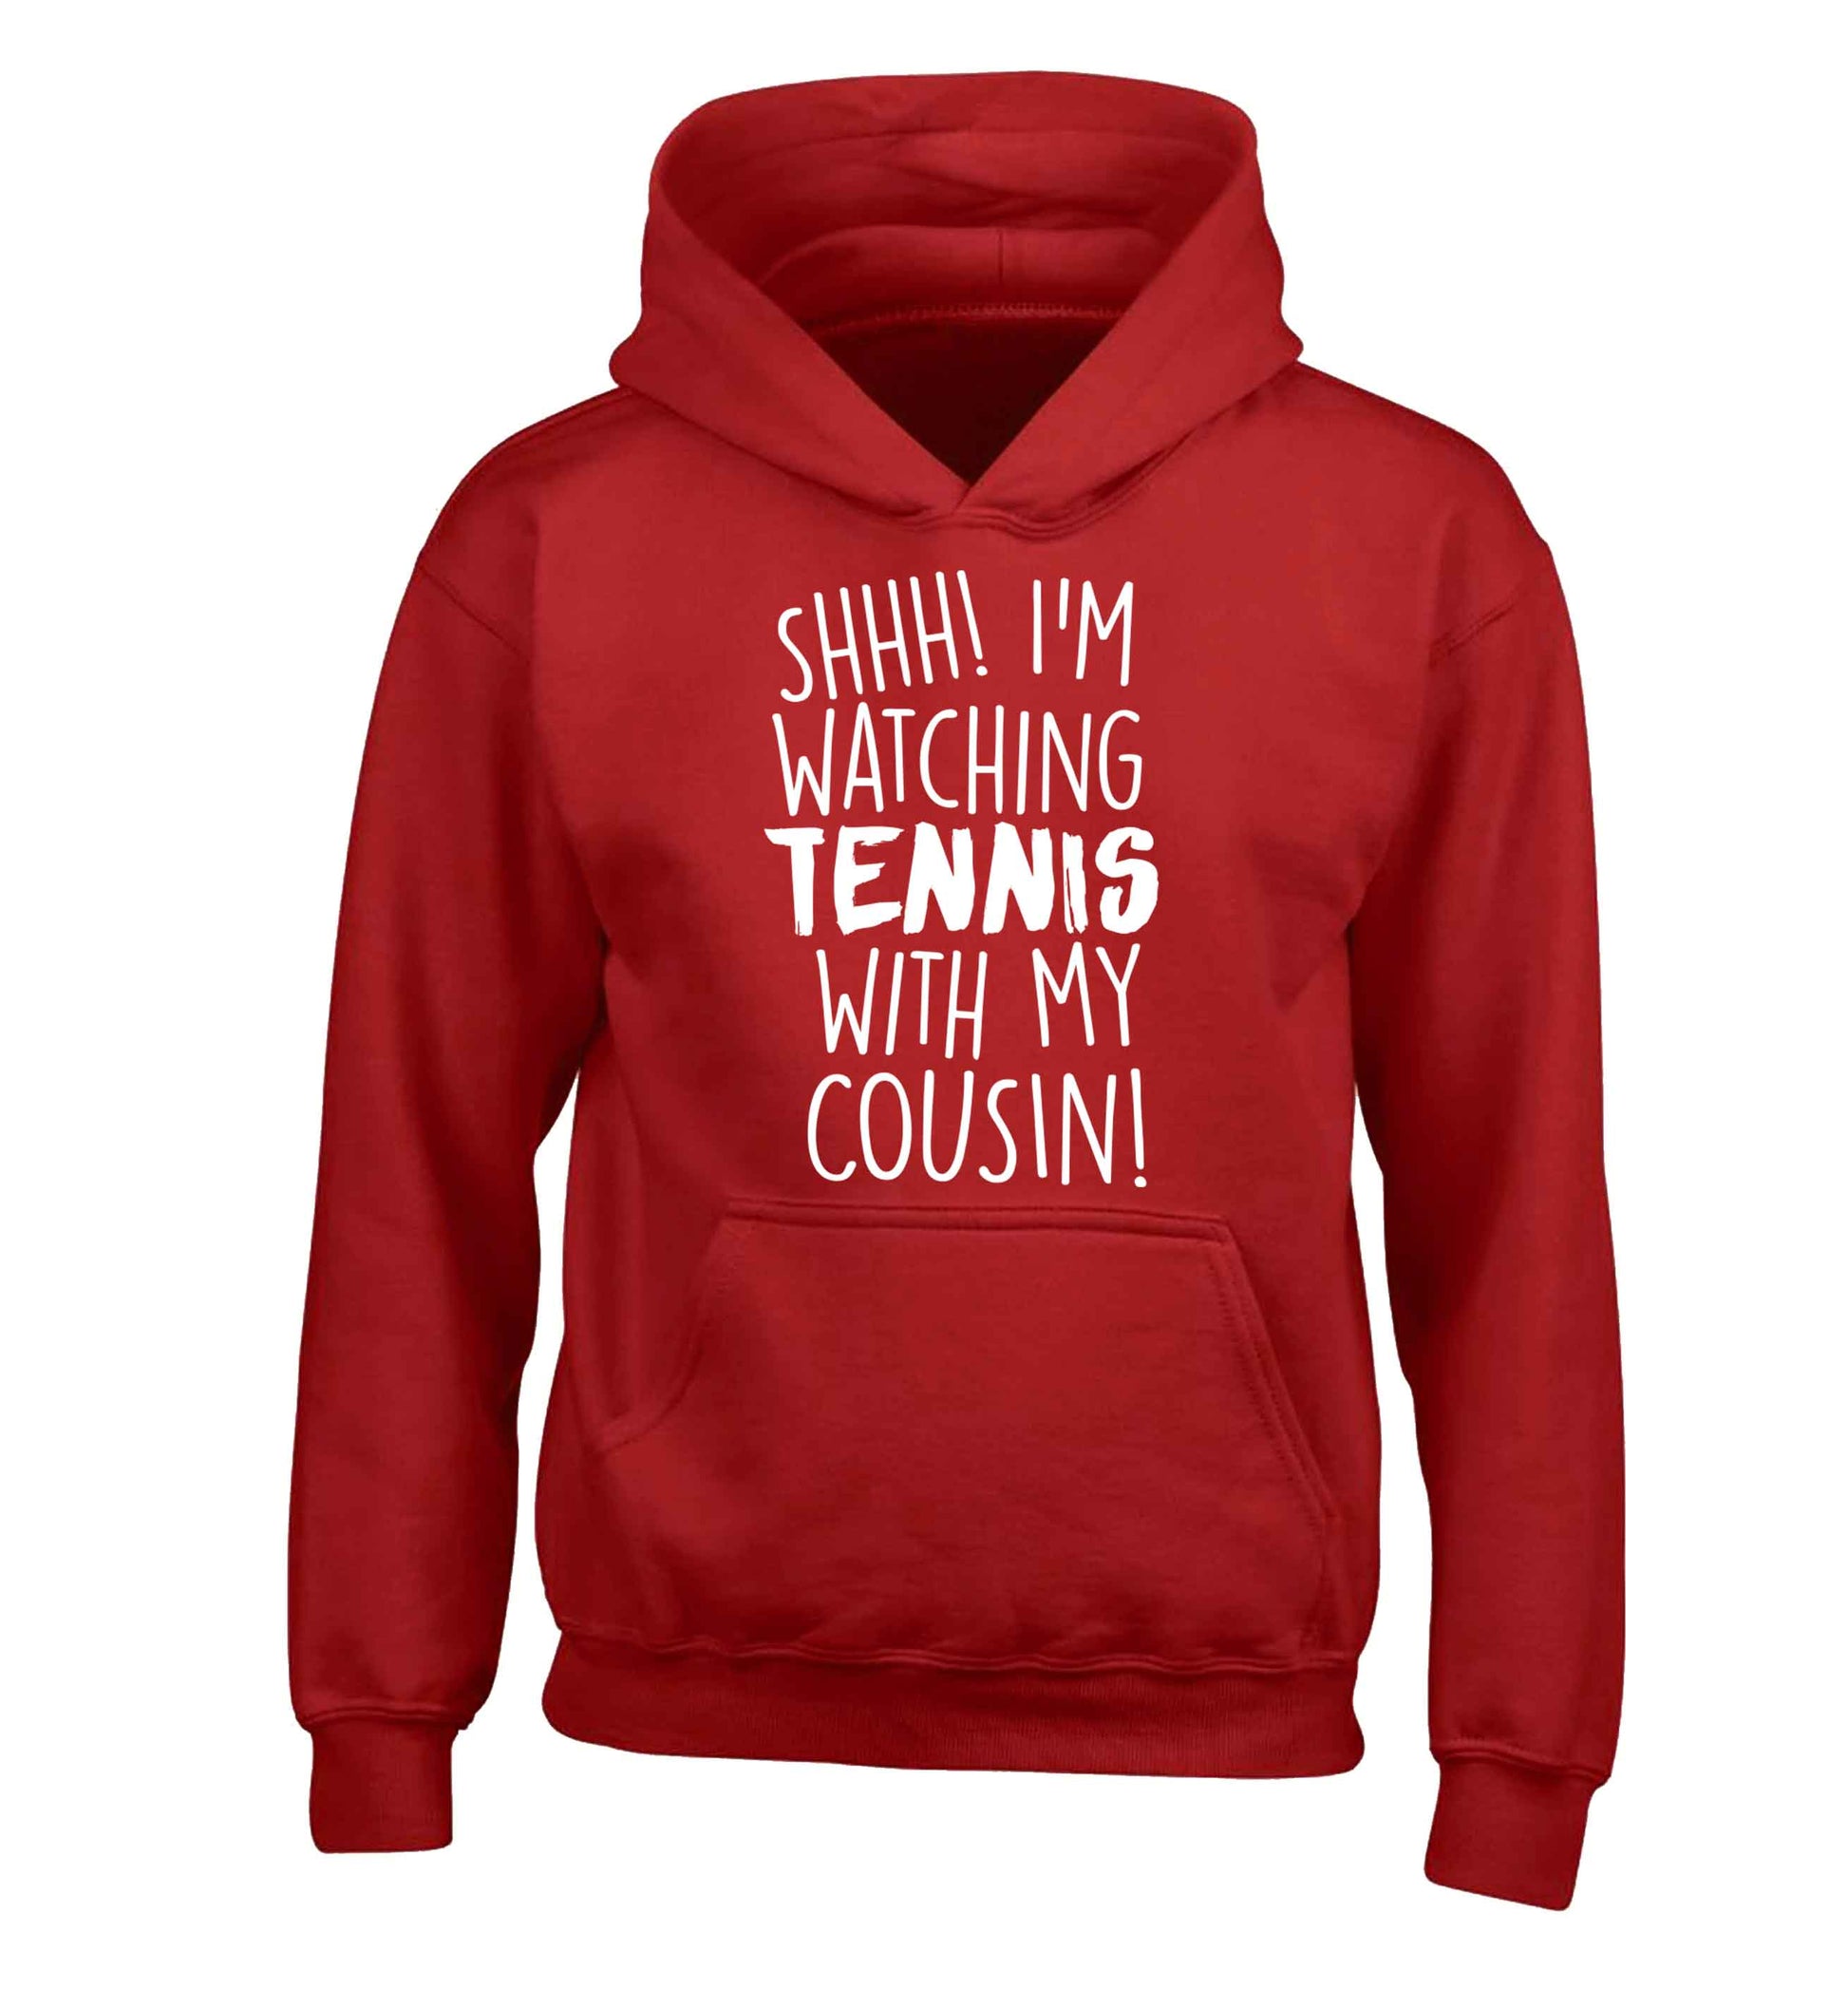 Shh! I'm watching tennis with my cousin! children's red hoodie 12-13 Years